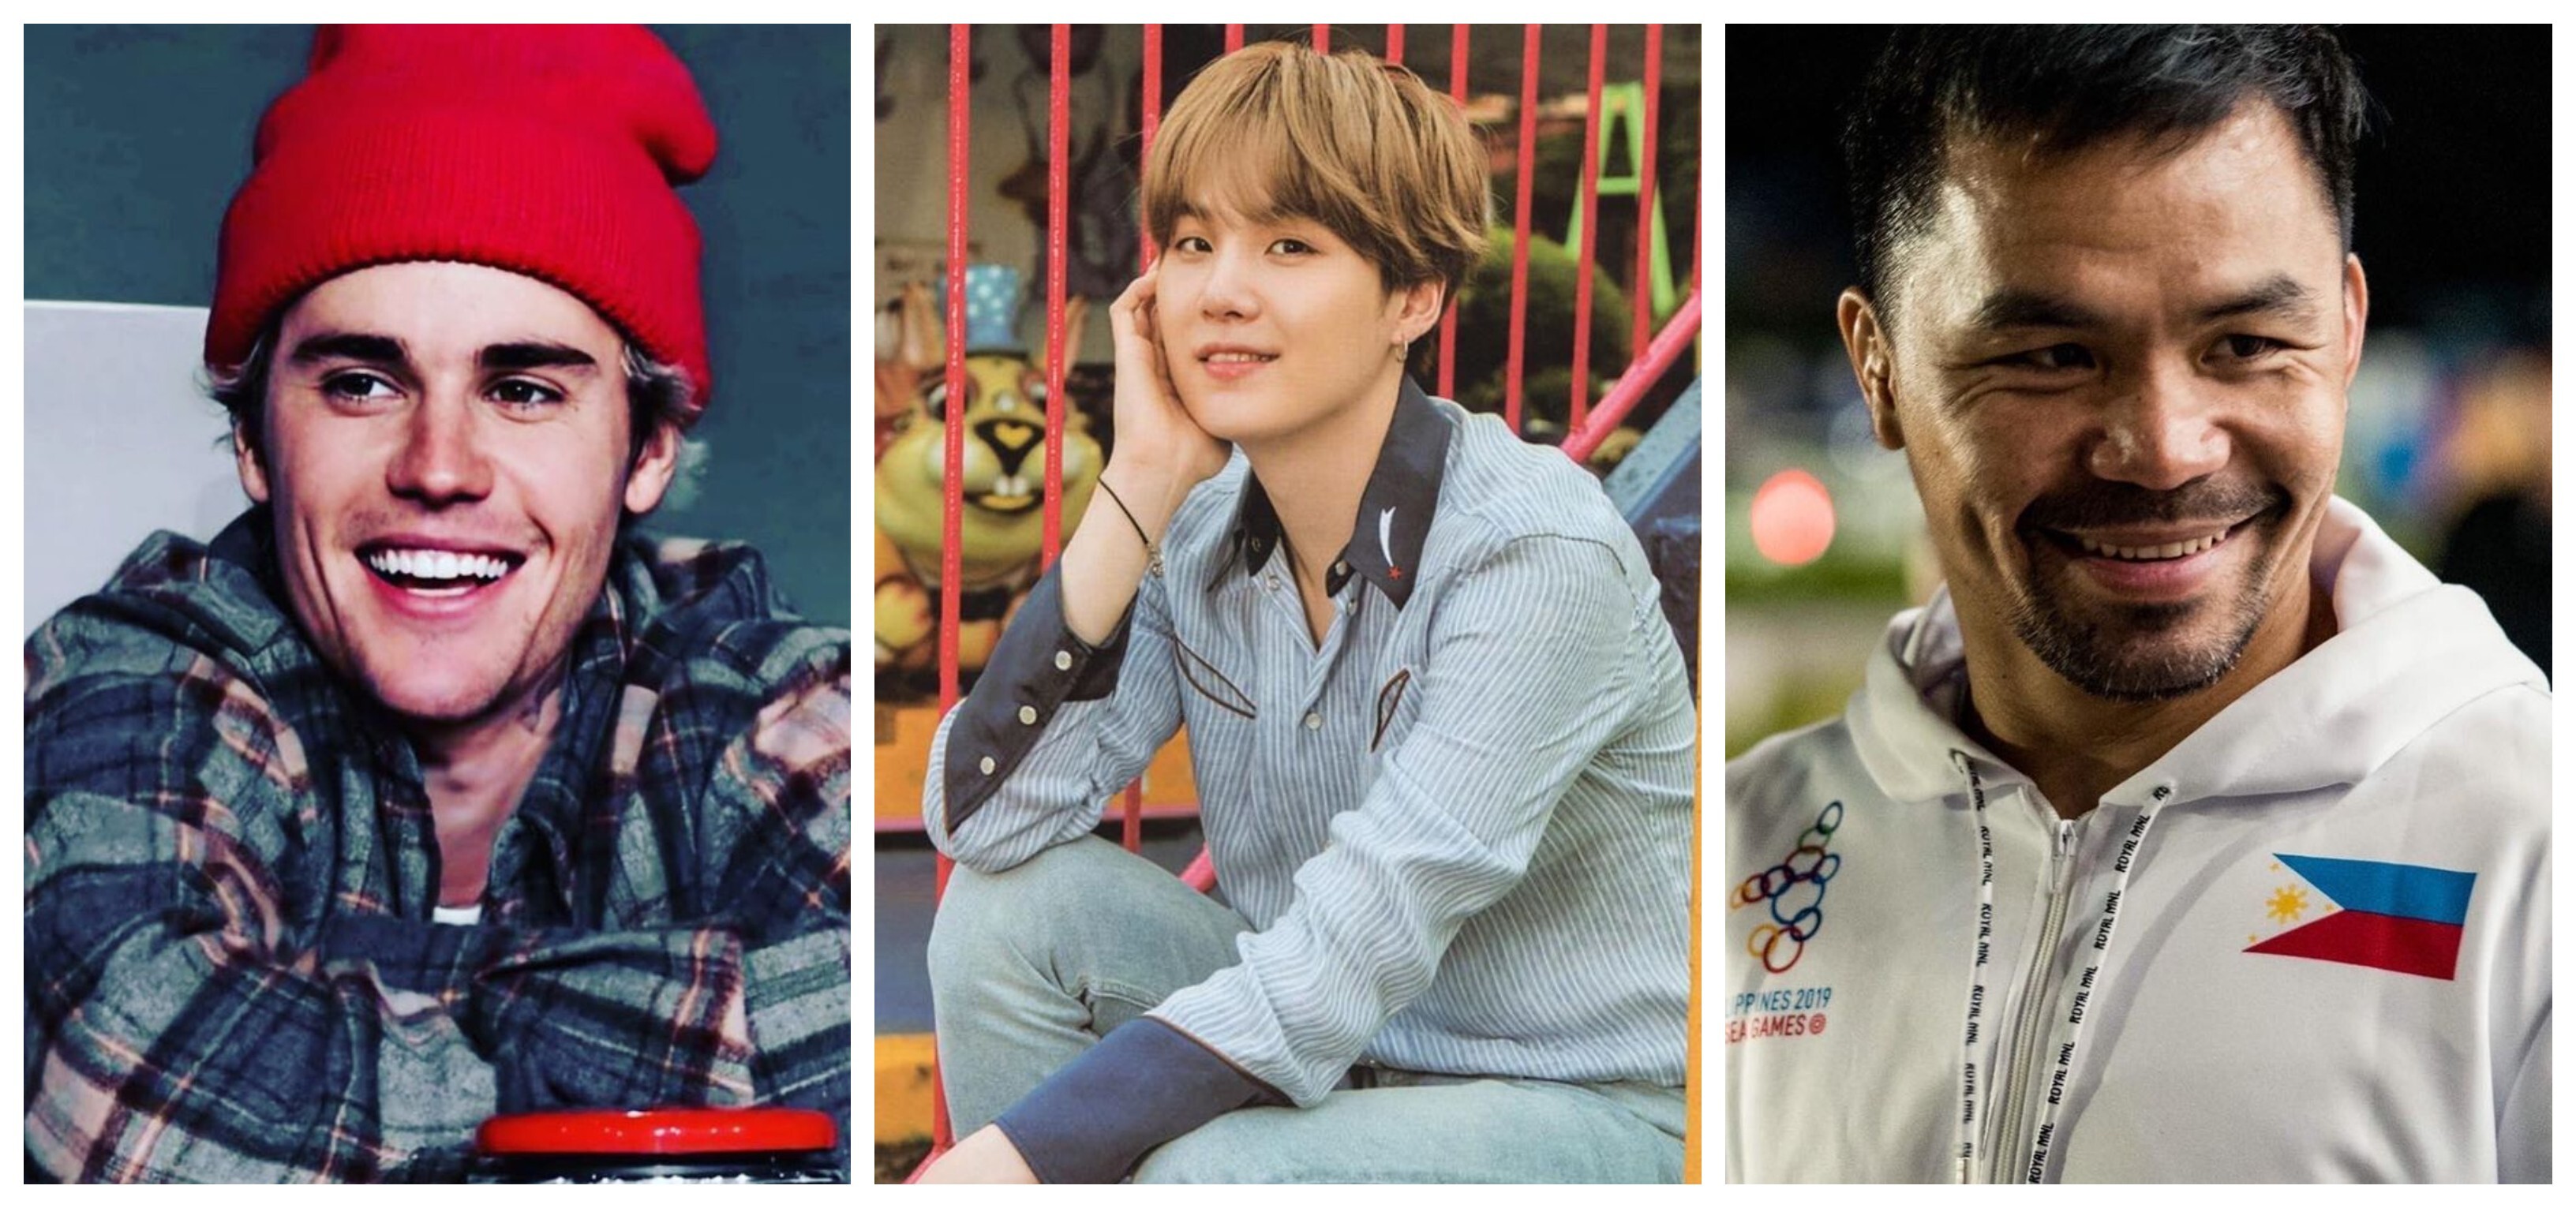 Justin Bieber and BTS’ Suga are among the celebrities stepping up in the face of the Covid-19 pandemic. Photo: Instagram